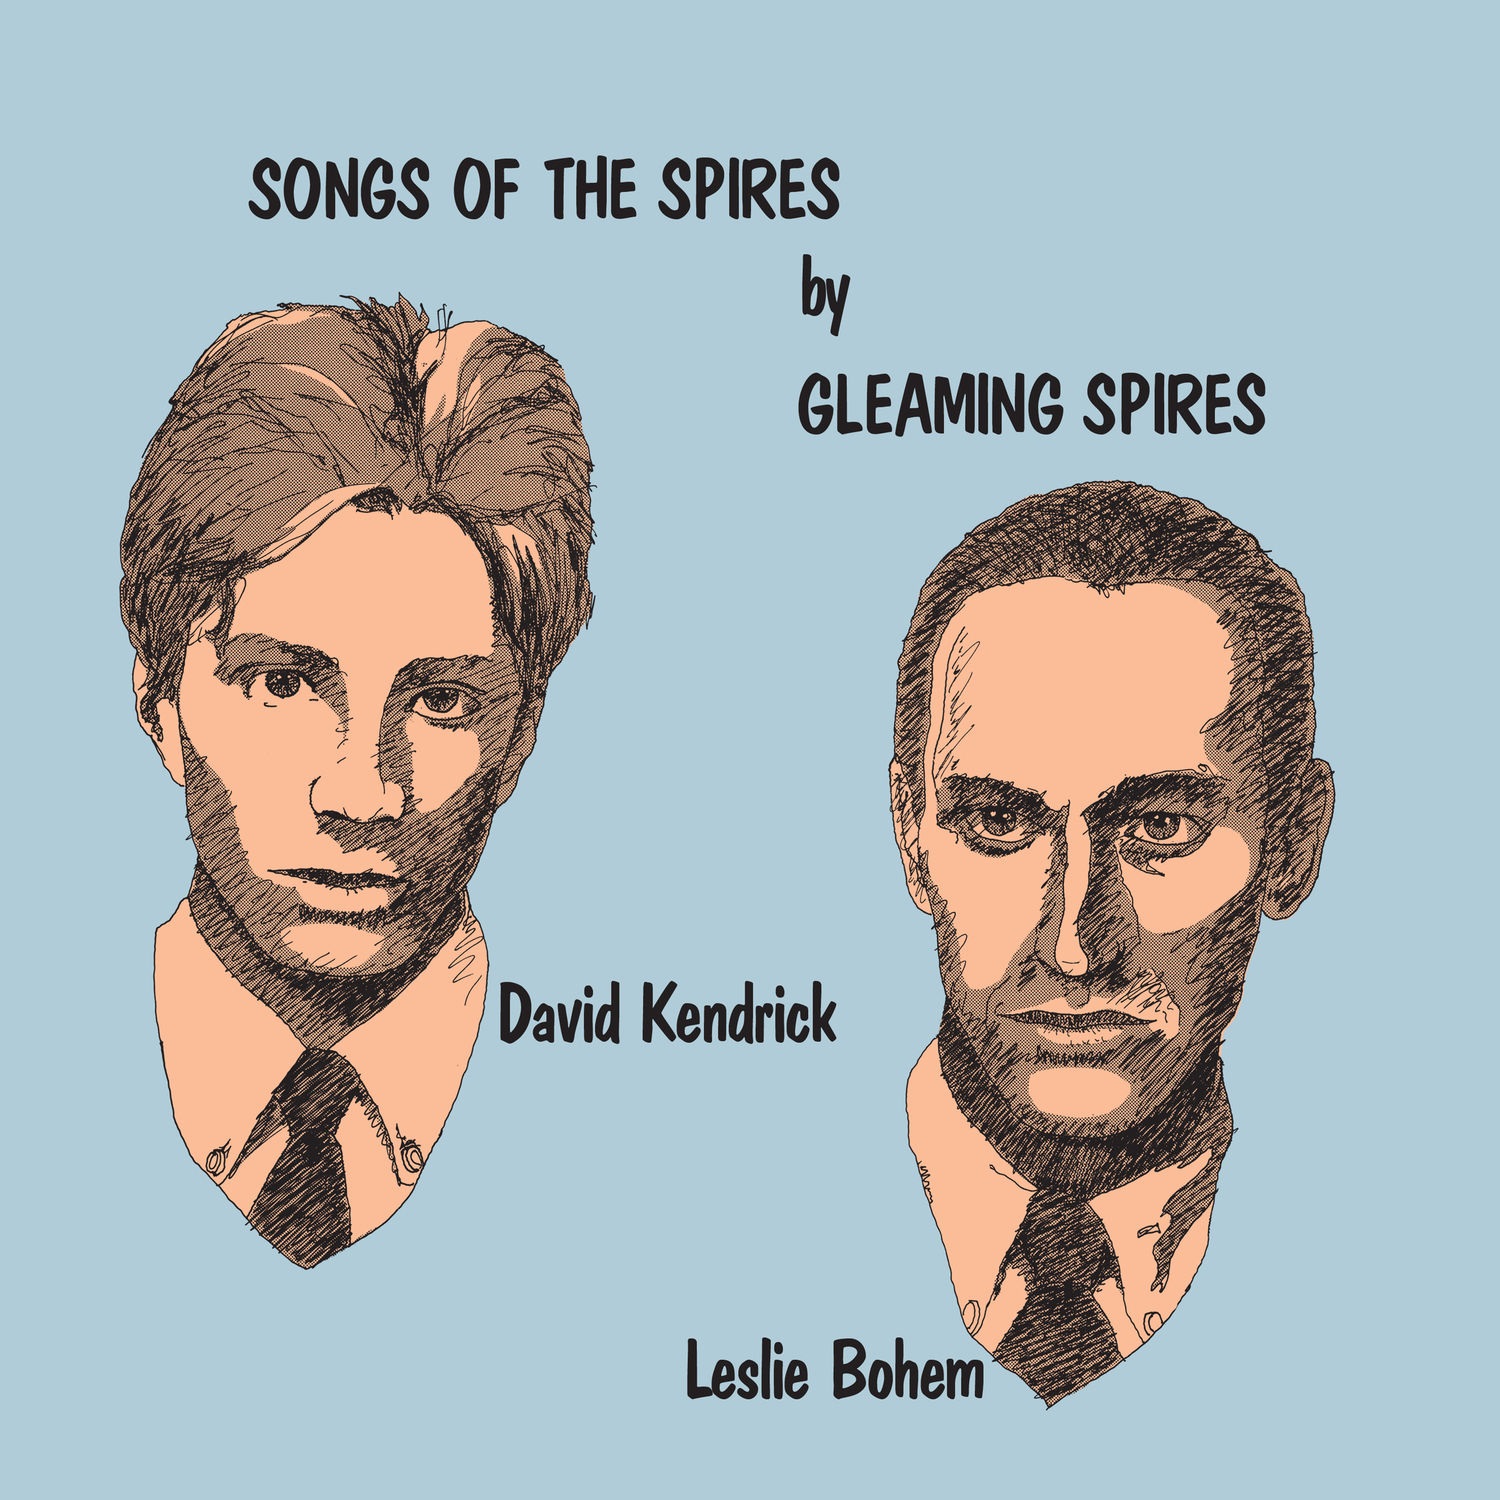 Gleaming Spires - Songs of the Spires (Expanded Edition) (1981/2021) [FLAC 24bit/96kHz]